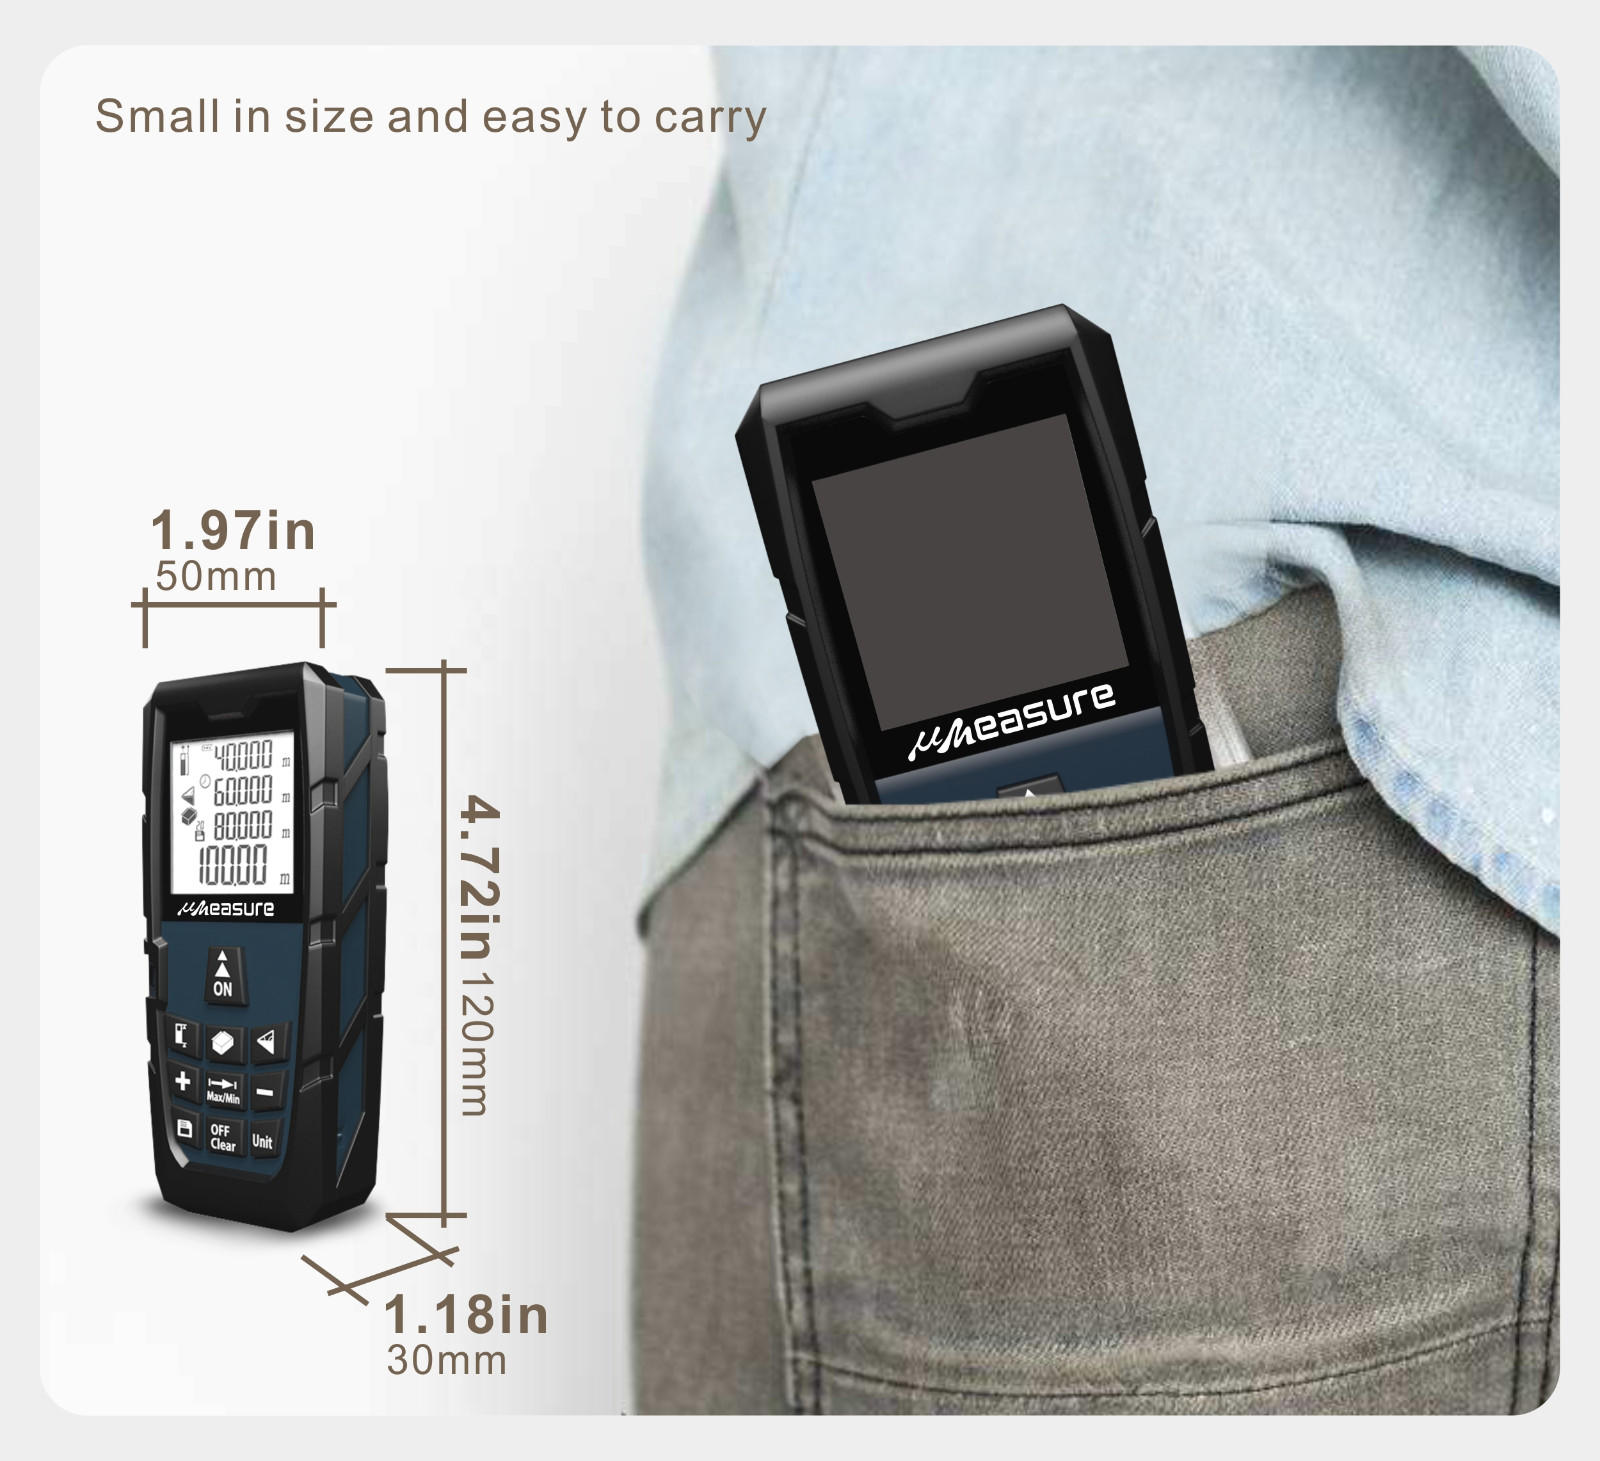 UMeasure durable laser measure reviews distance for worker